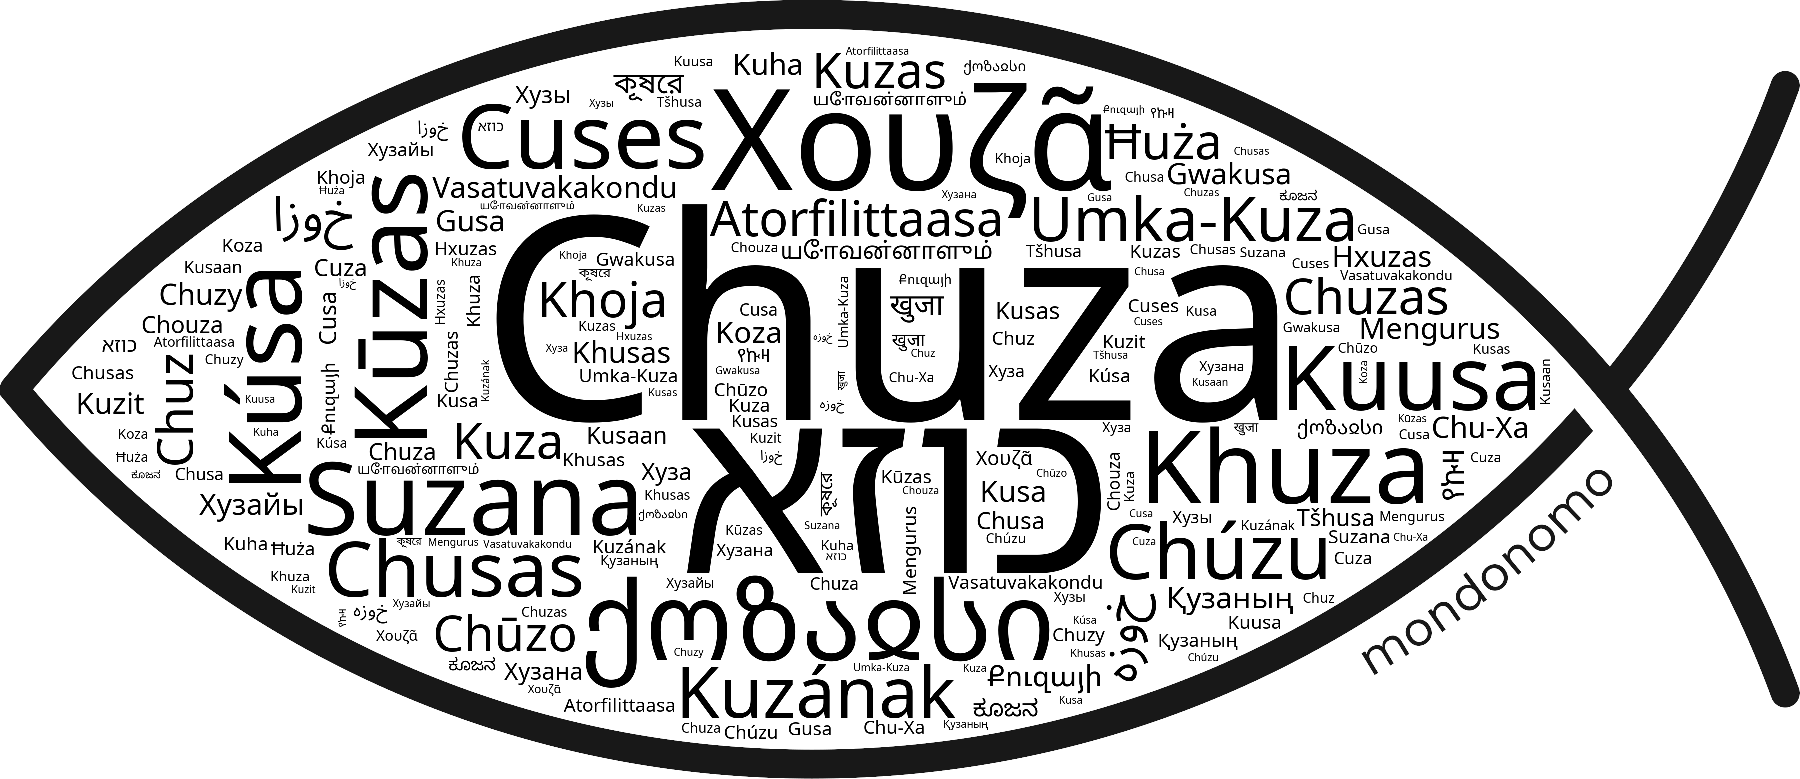 Name Chuza in the world's Bibles